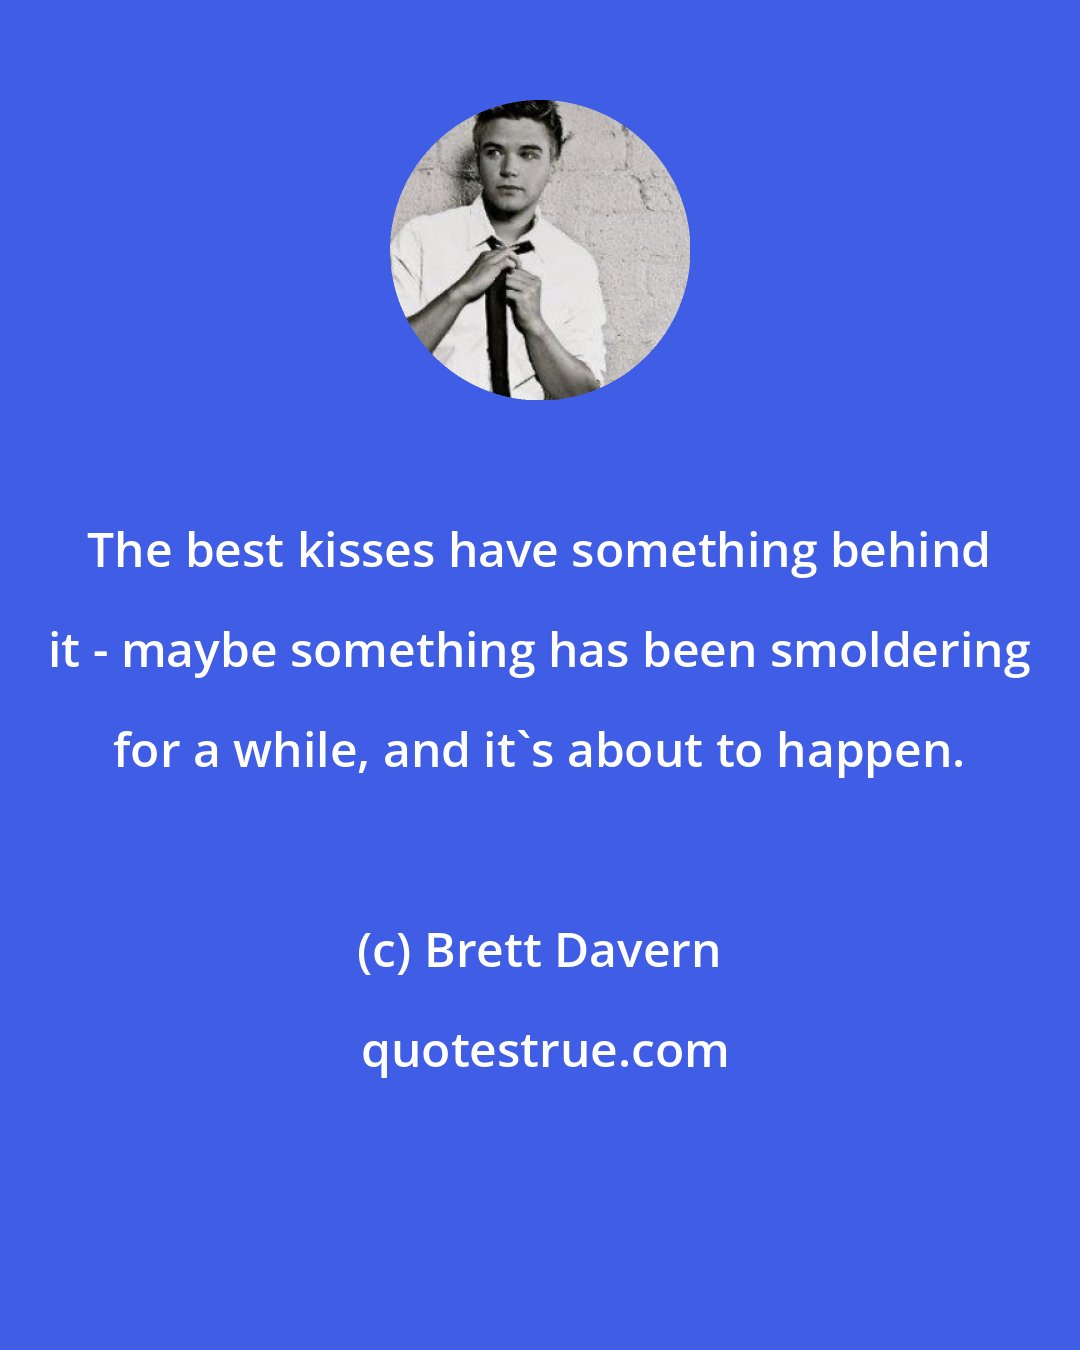 Brett Davern: The best kisses have something behind it - maybe something has been smoldering for a while, and it's about to happen.